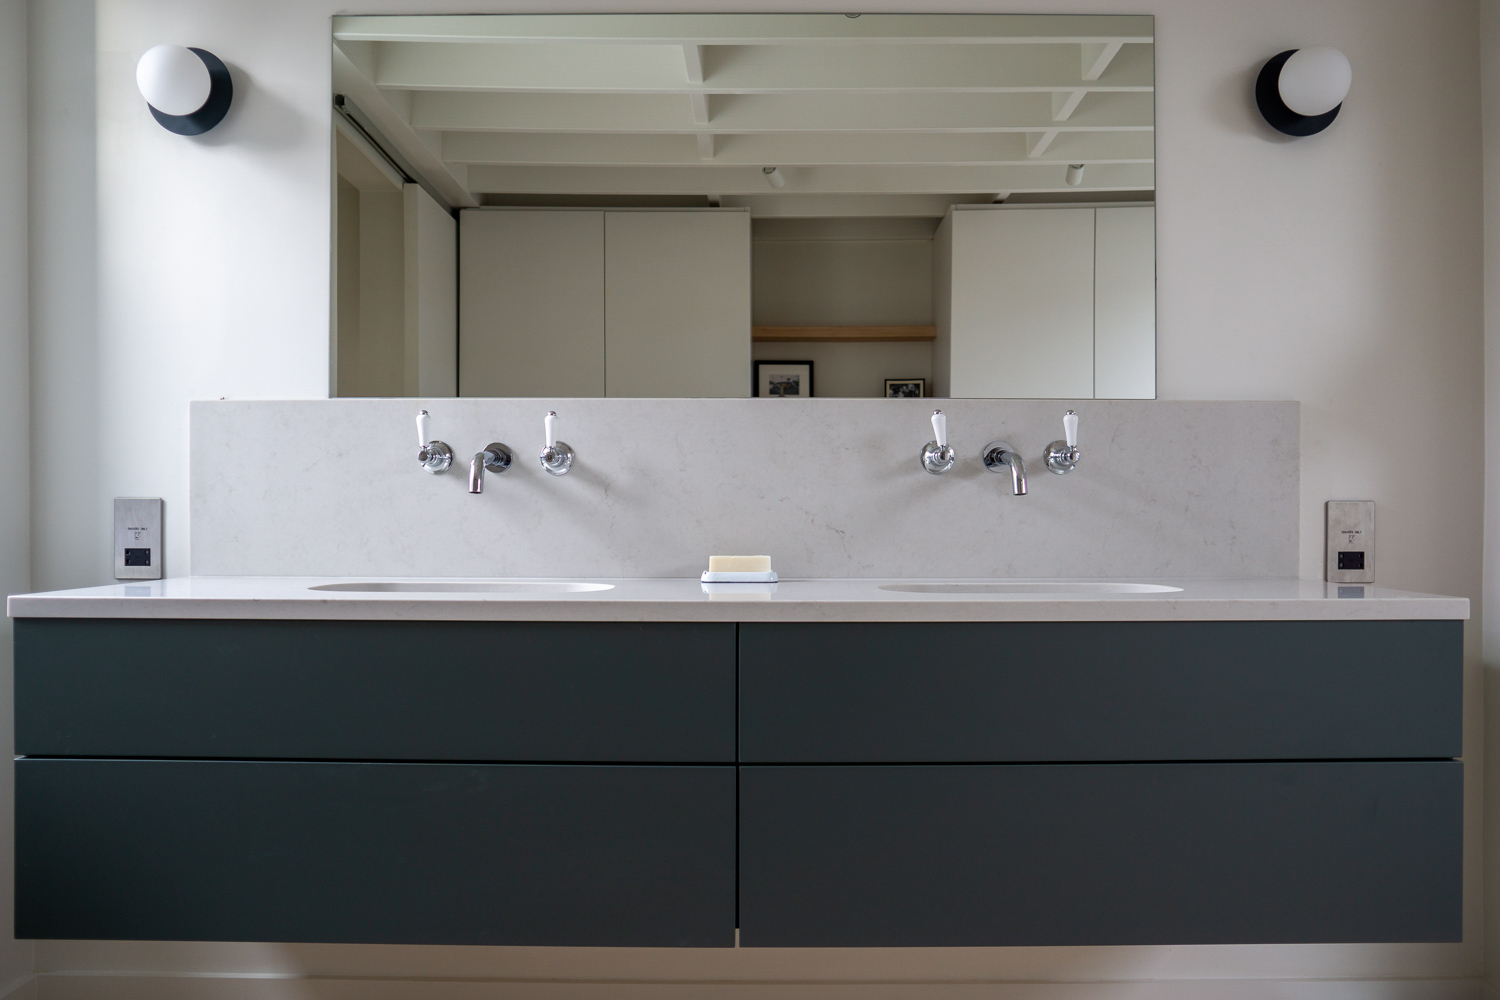 TENNYSON ROAD, Cesar Stone vanity mounted as floating countertop all drawers functional around plumbing
